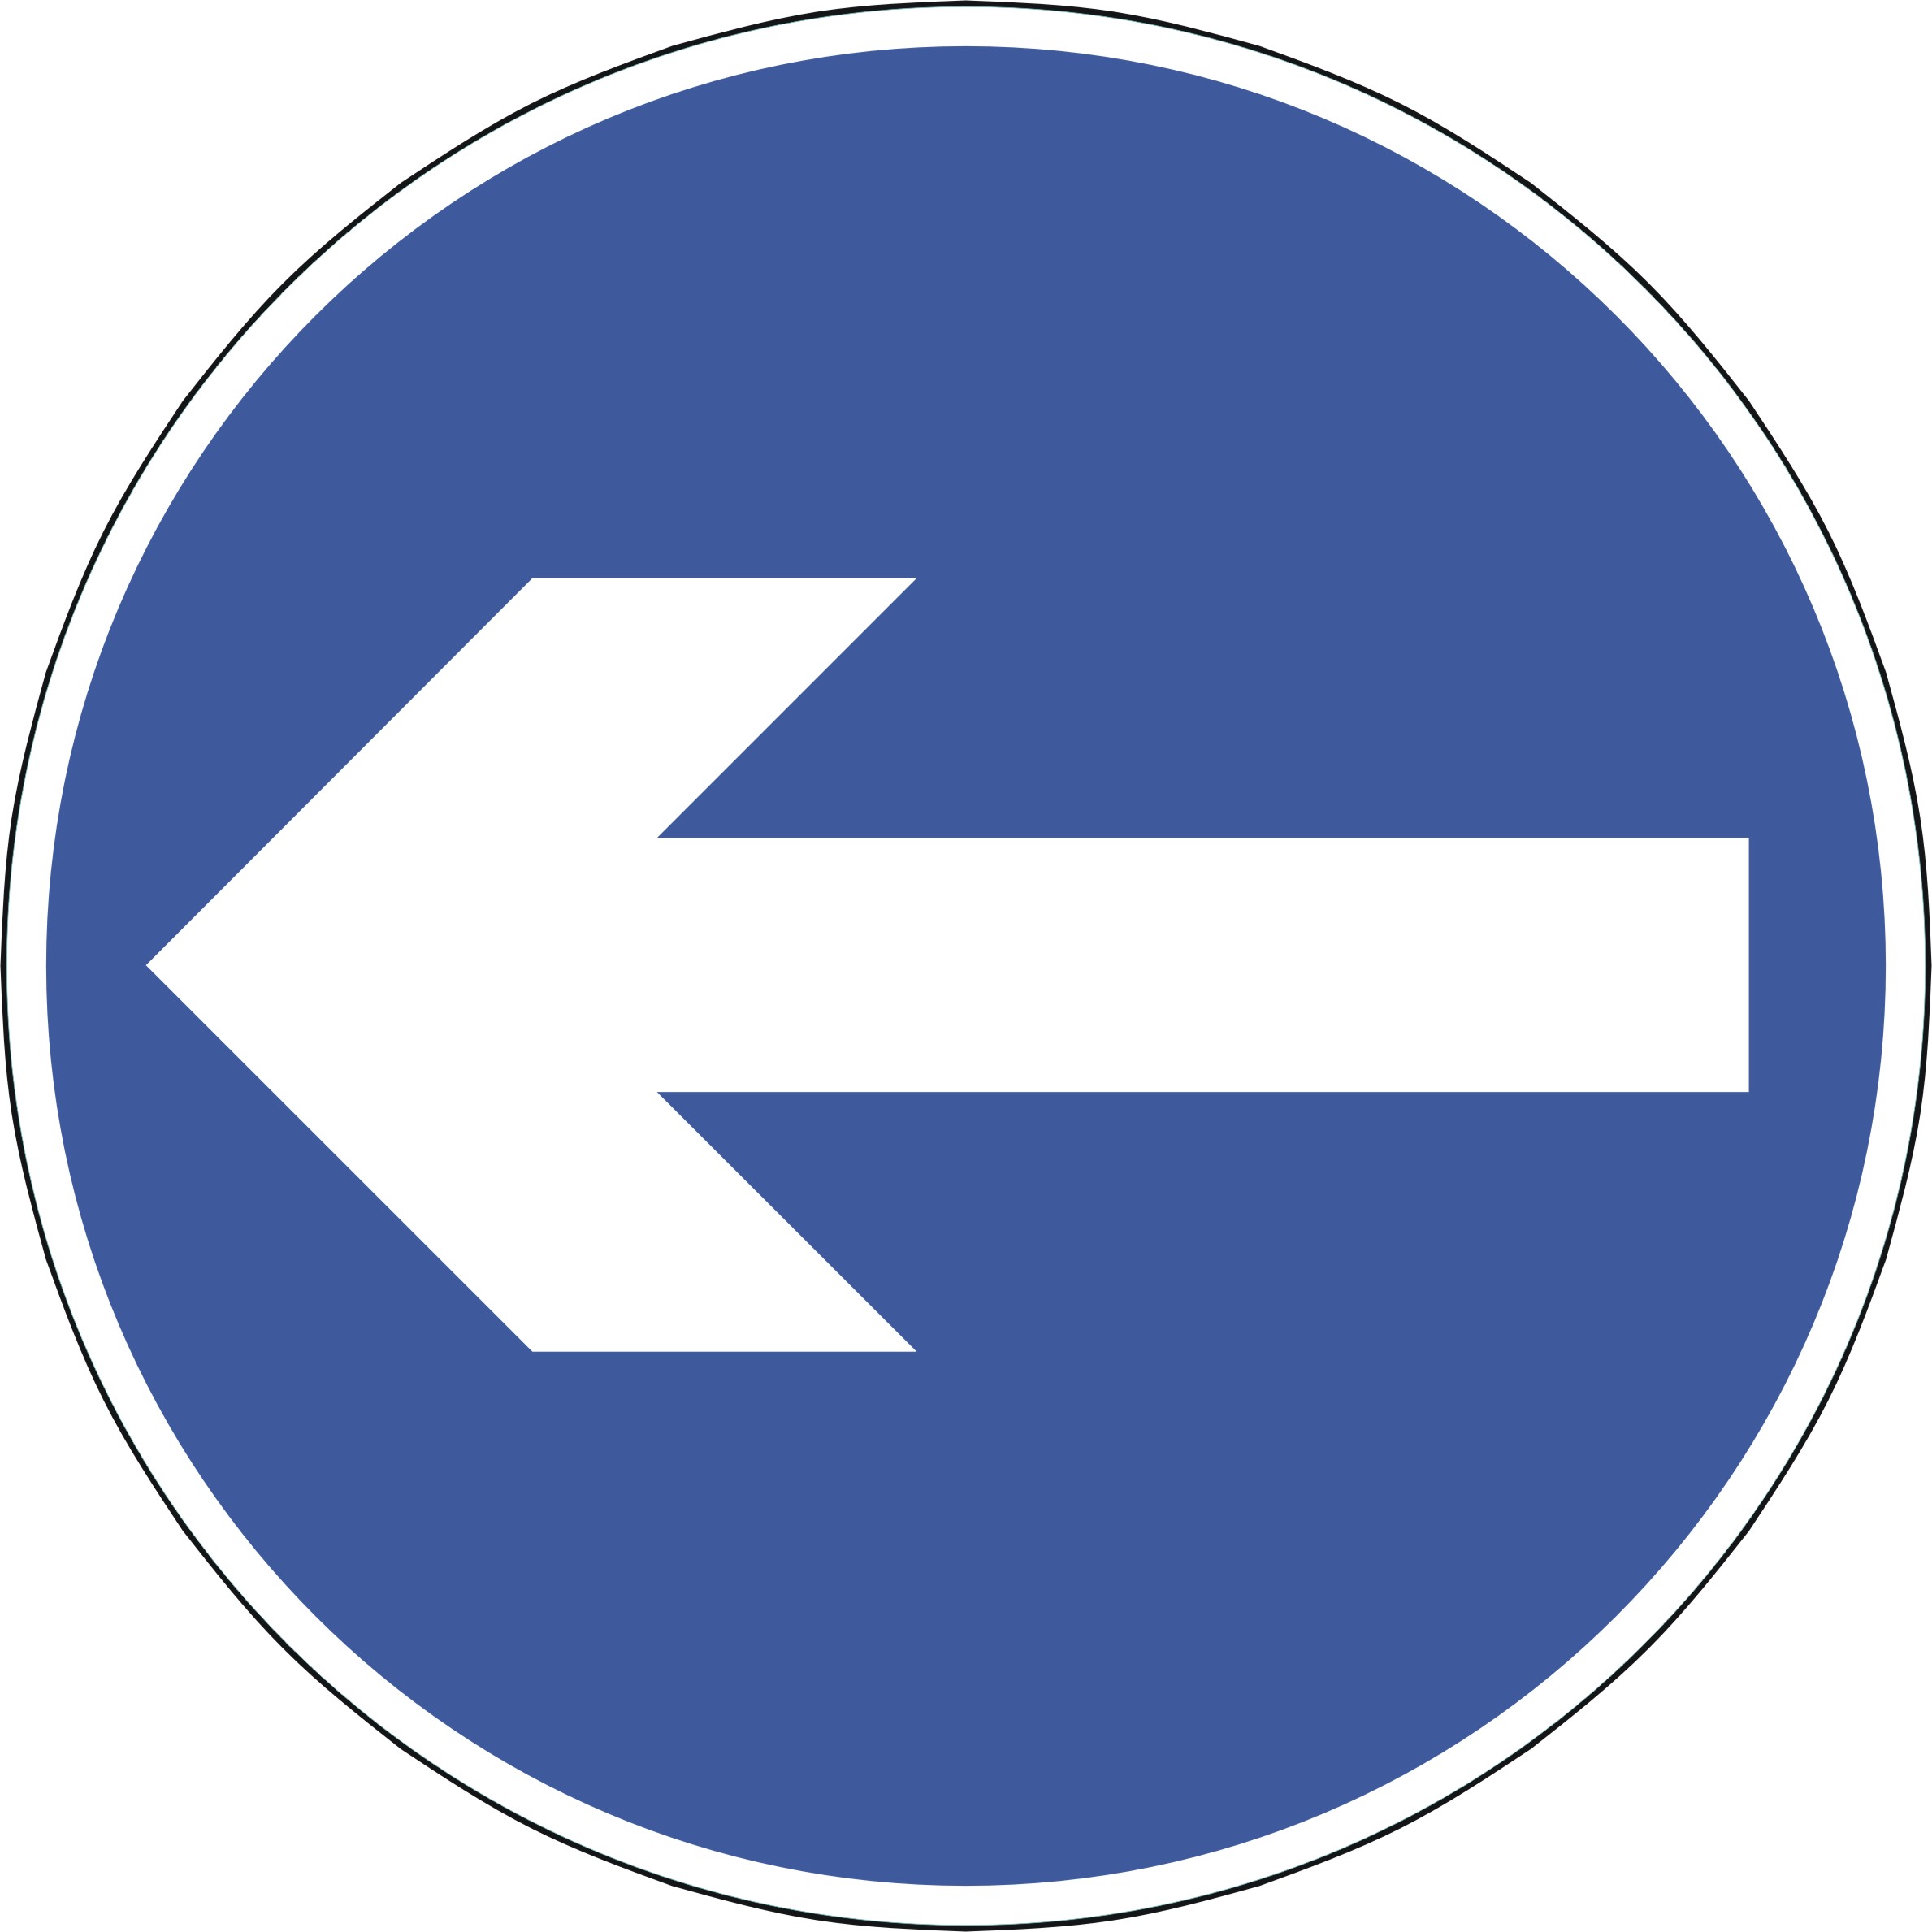 Vehicular traffic must proceed in the direction indicated by the arrow ...